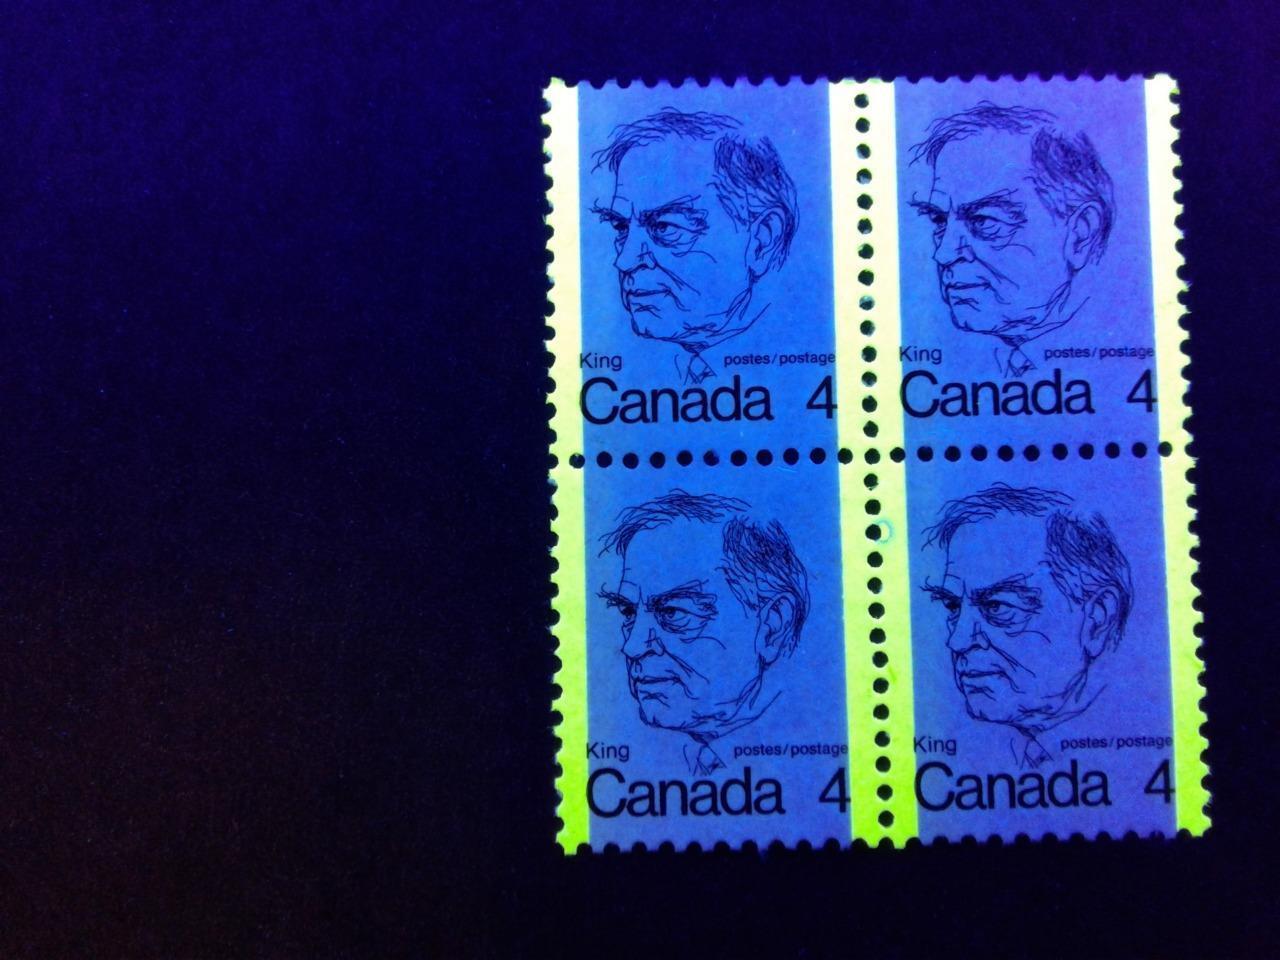 Canada #589 (SG#696) 4c Black King 1972-1978 Caricature Issue LF Paper Ty 13 Block of 4 With Tag Flaw VF-80NH Brixton Chrome 